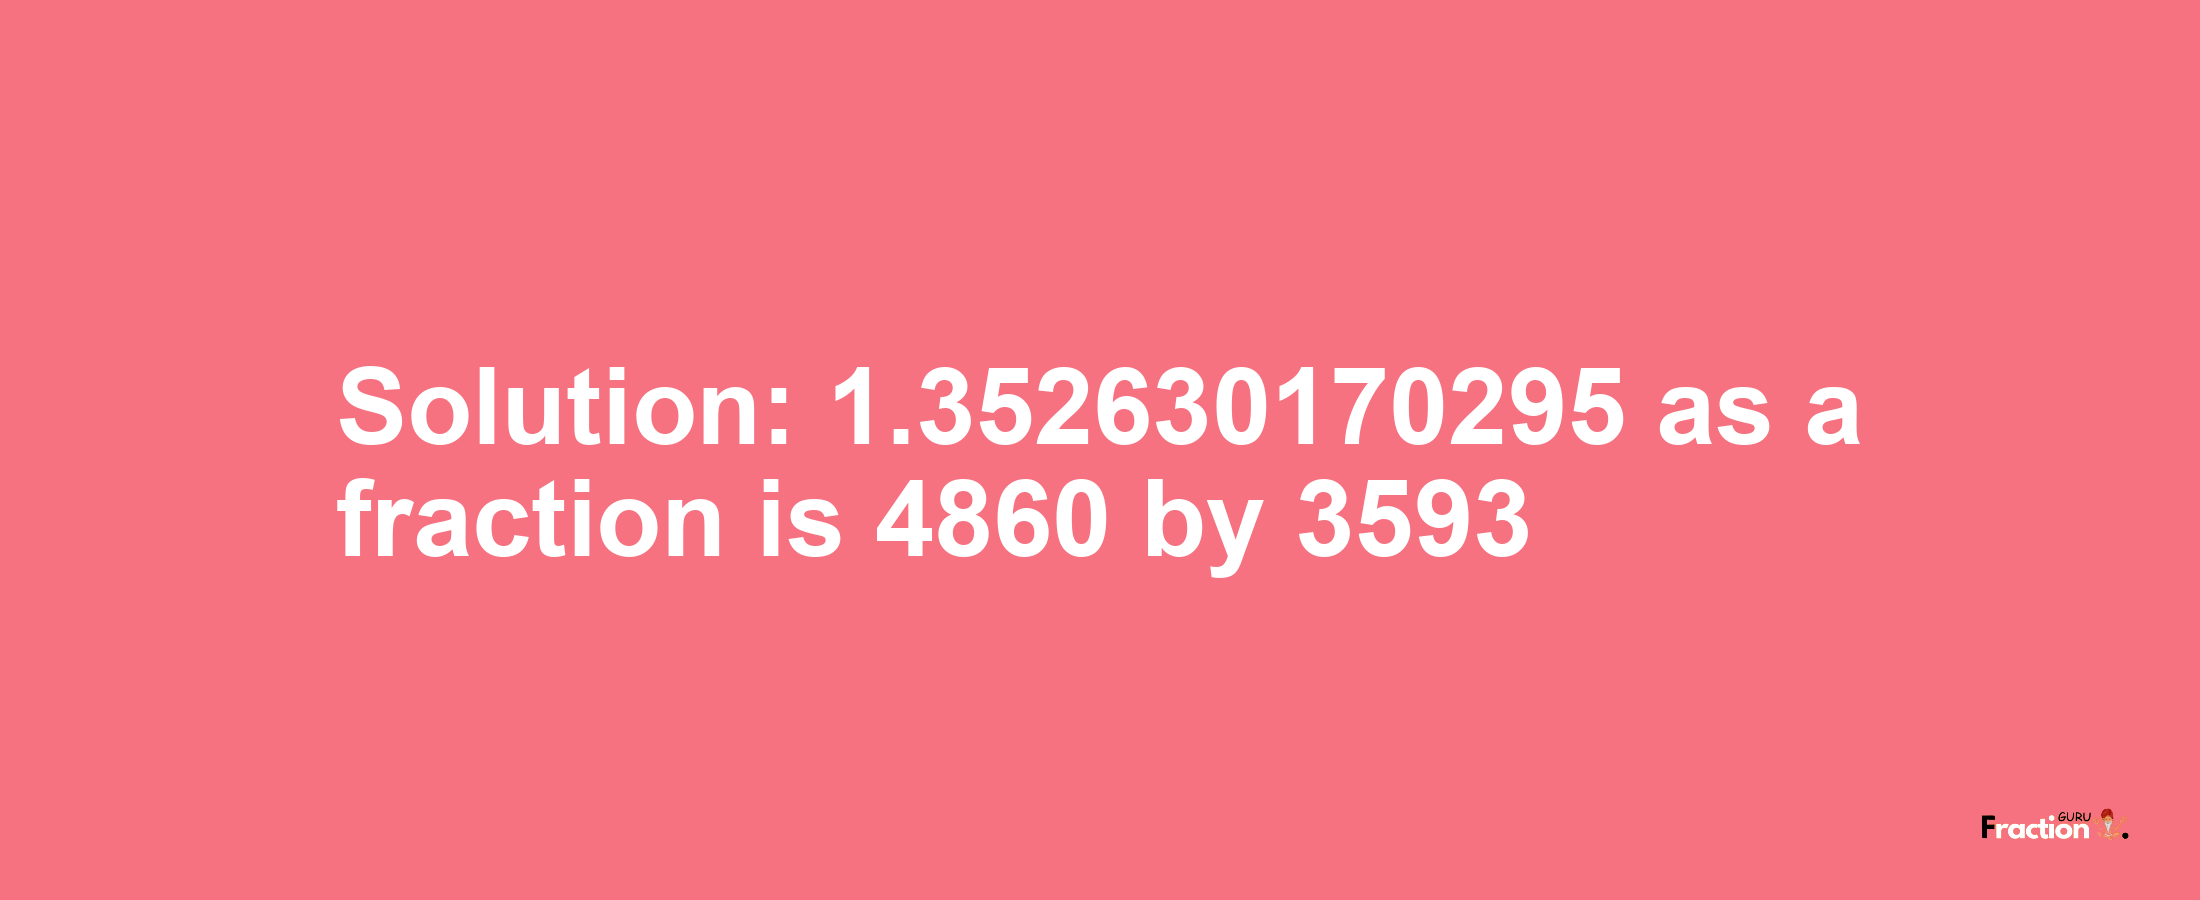 Solution:1.352630170295 as a fraction is 4860/3593